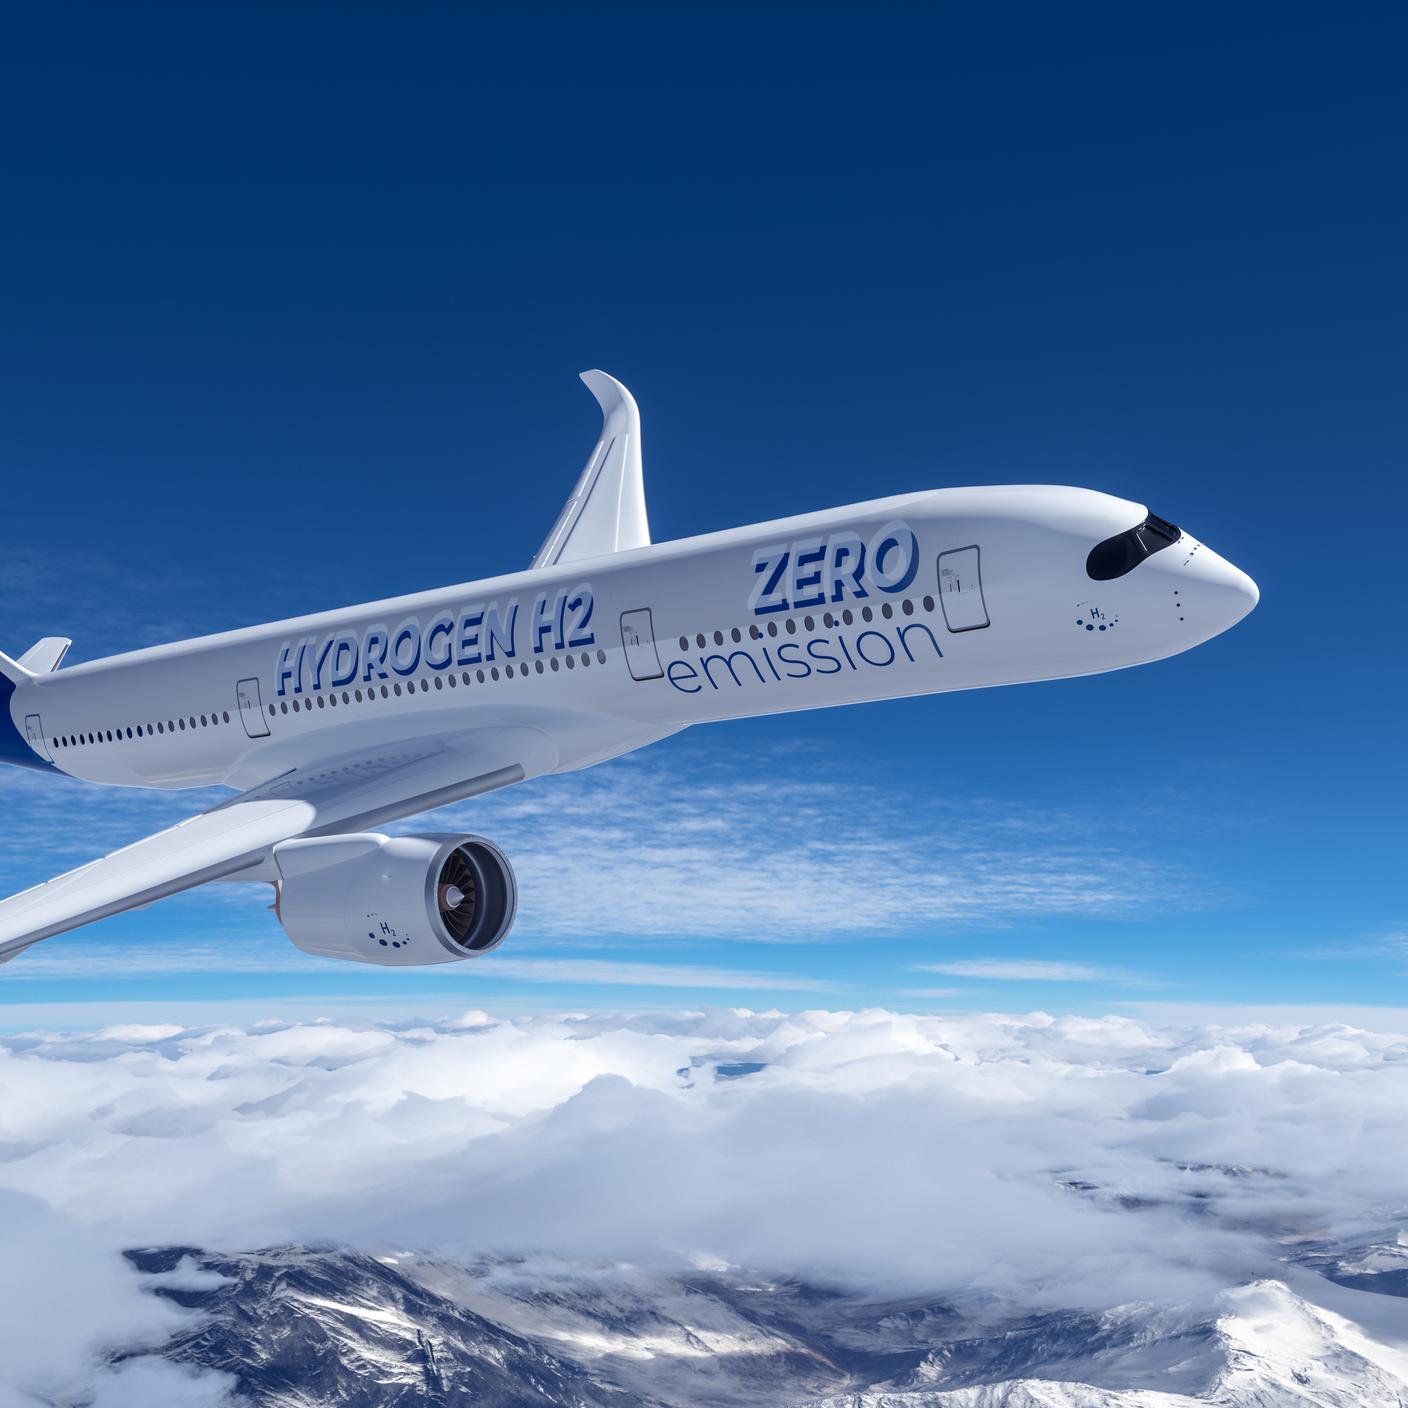 Blue Hydrogen filled H2 Aeroplane flying in the sky - future H2 energy concept.